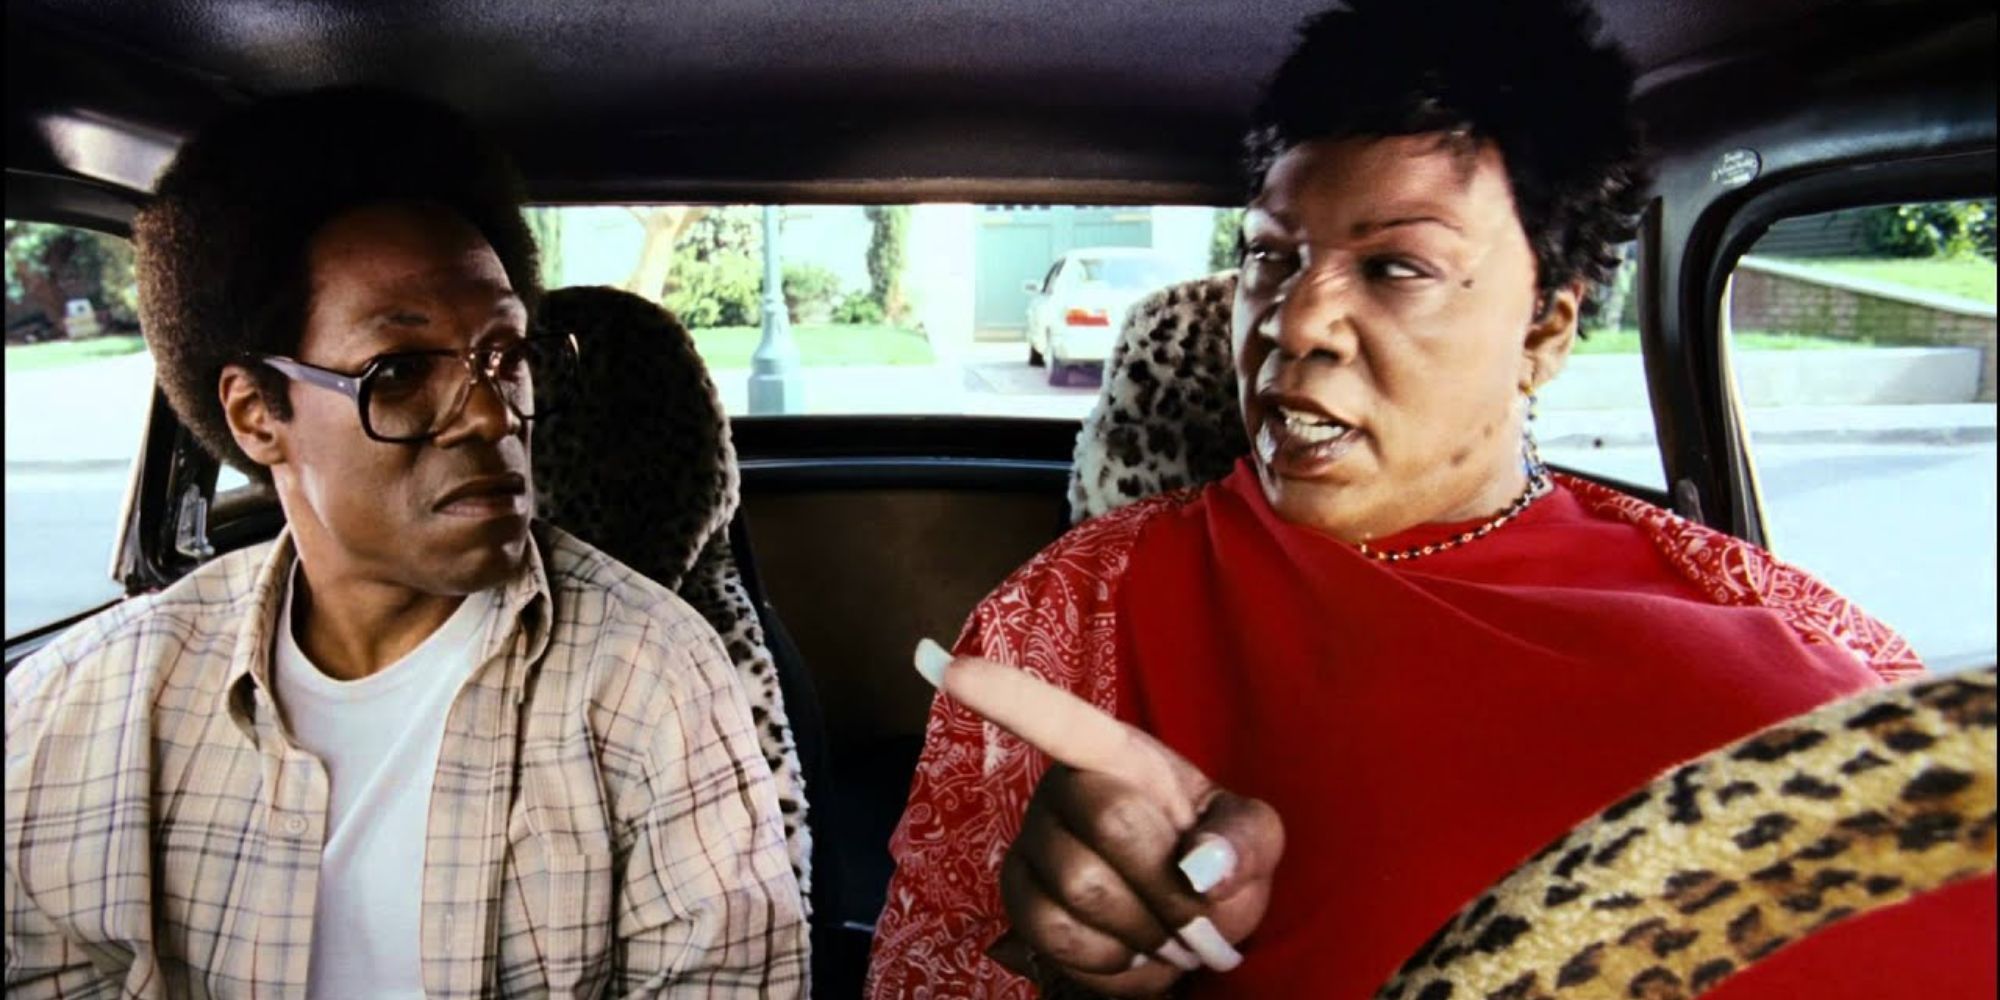 Eddie Murphy playing two roles in still from 'Norbit'